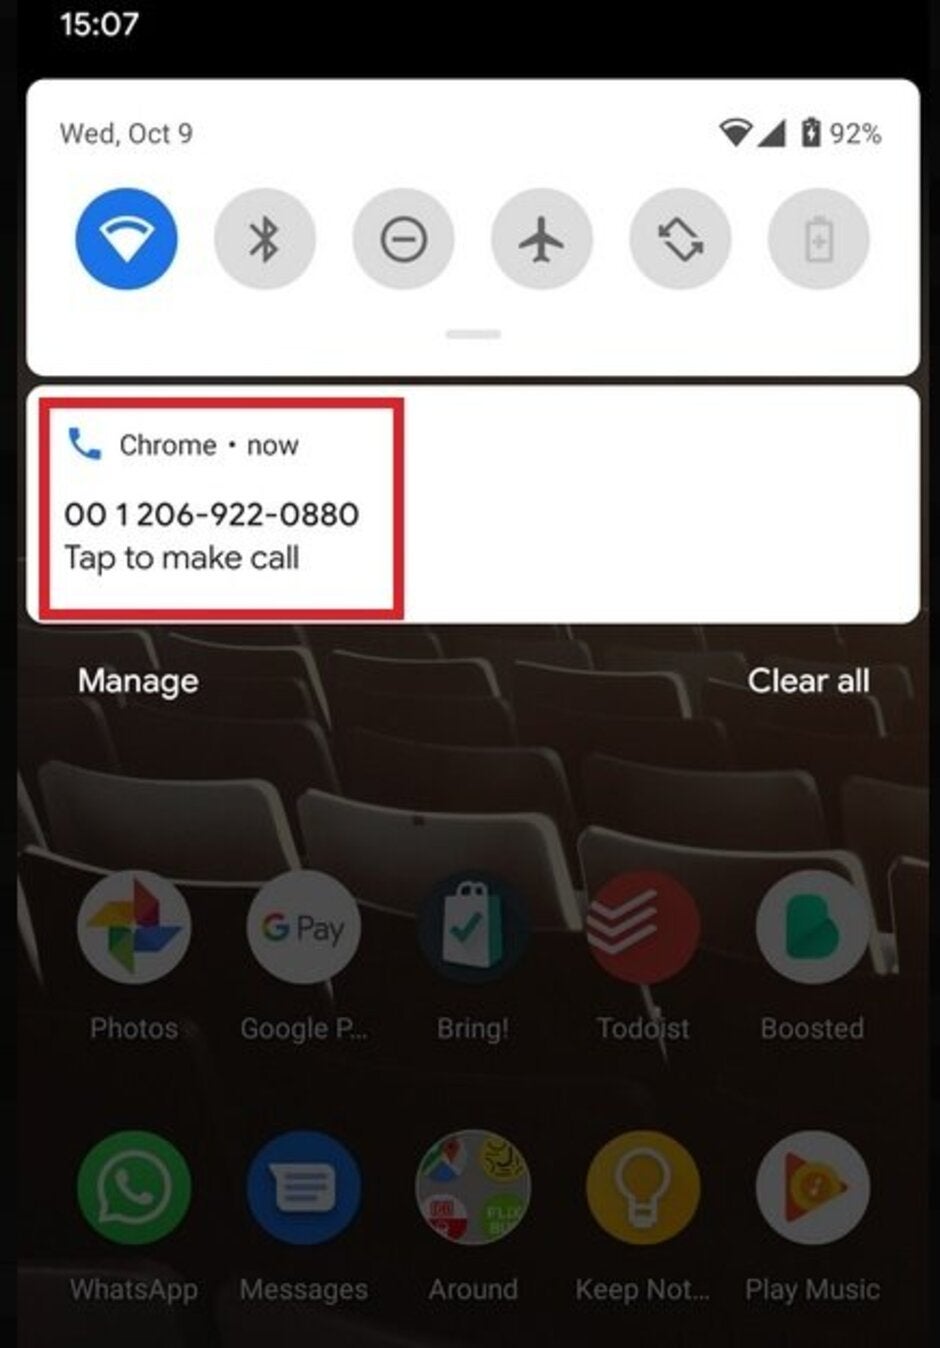 Tap on the notification and the number will be entered into your phone's dialer app - Google tests feature that will send a phone number from your desktop to your phone's dialer